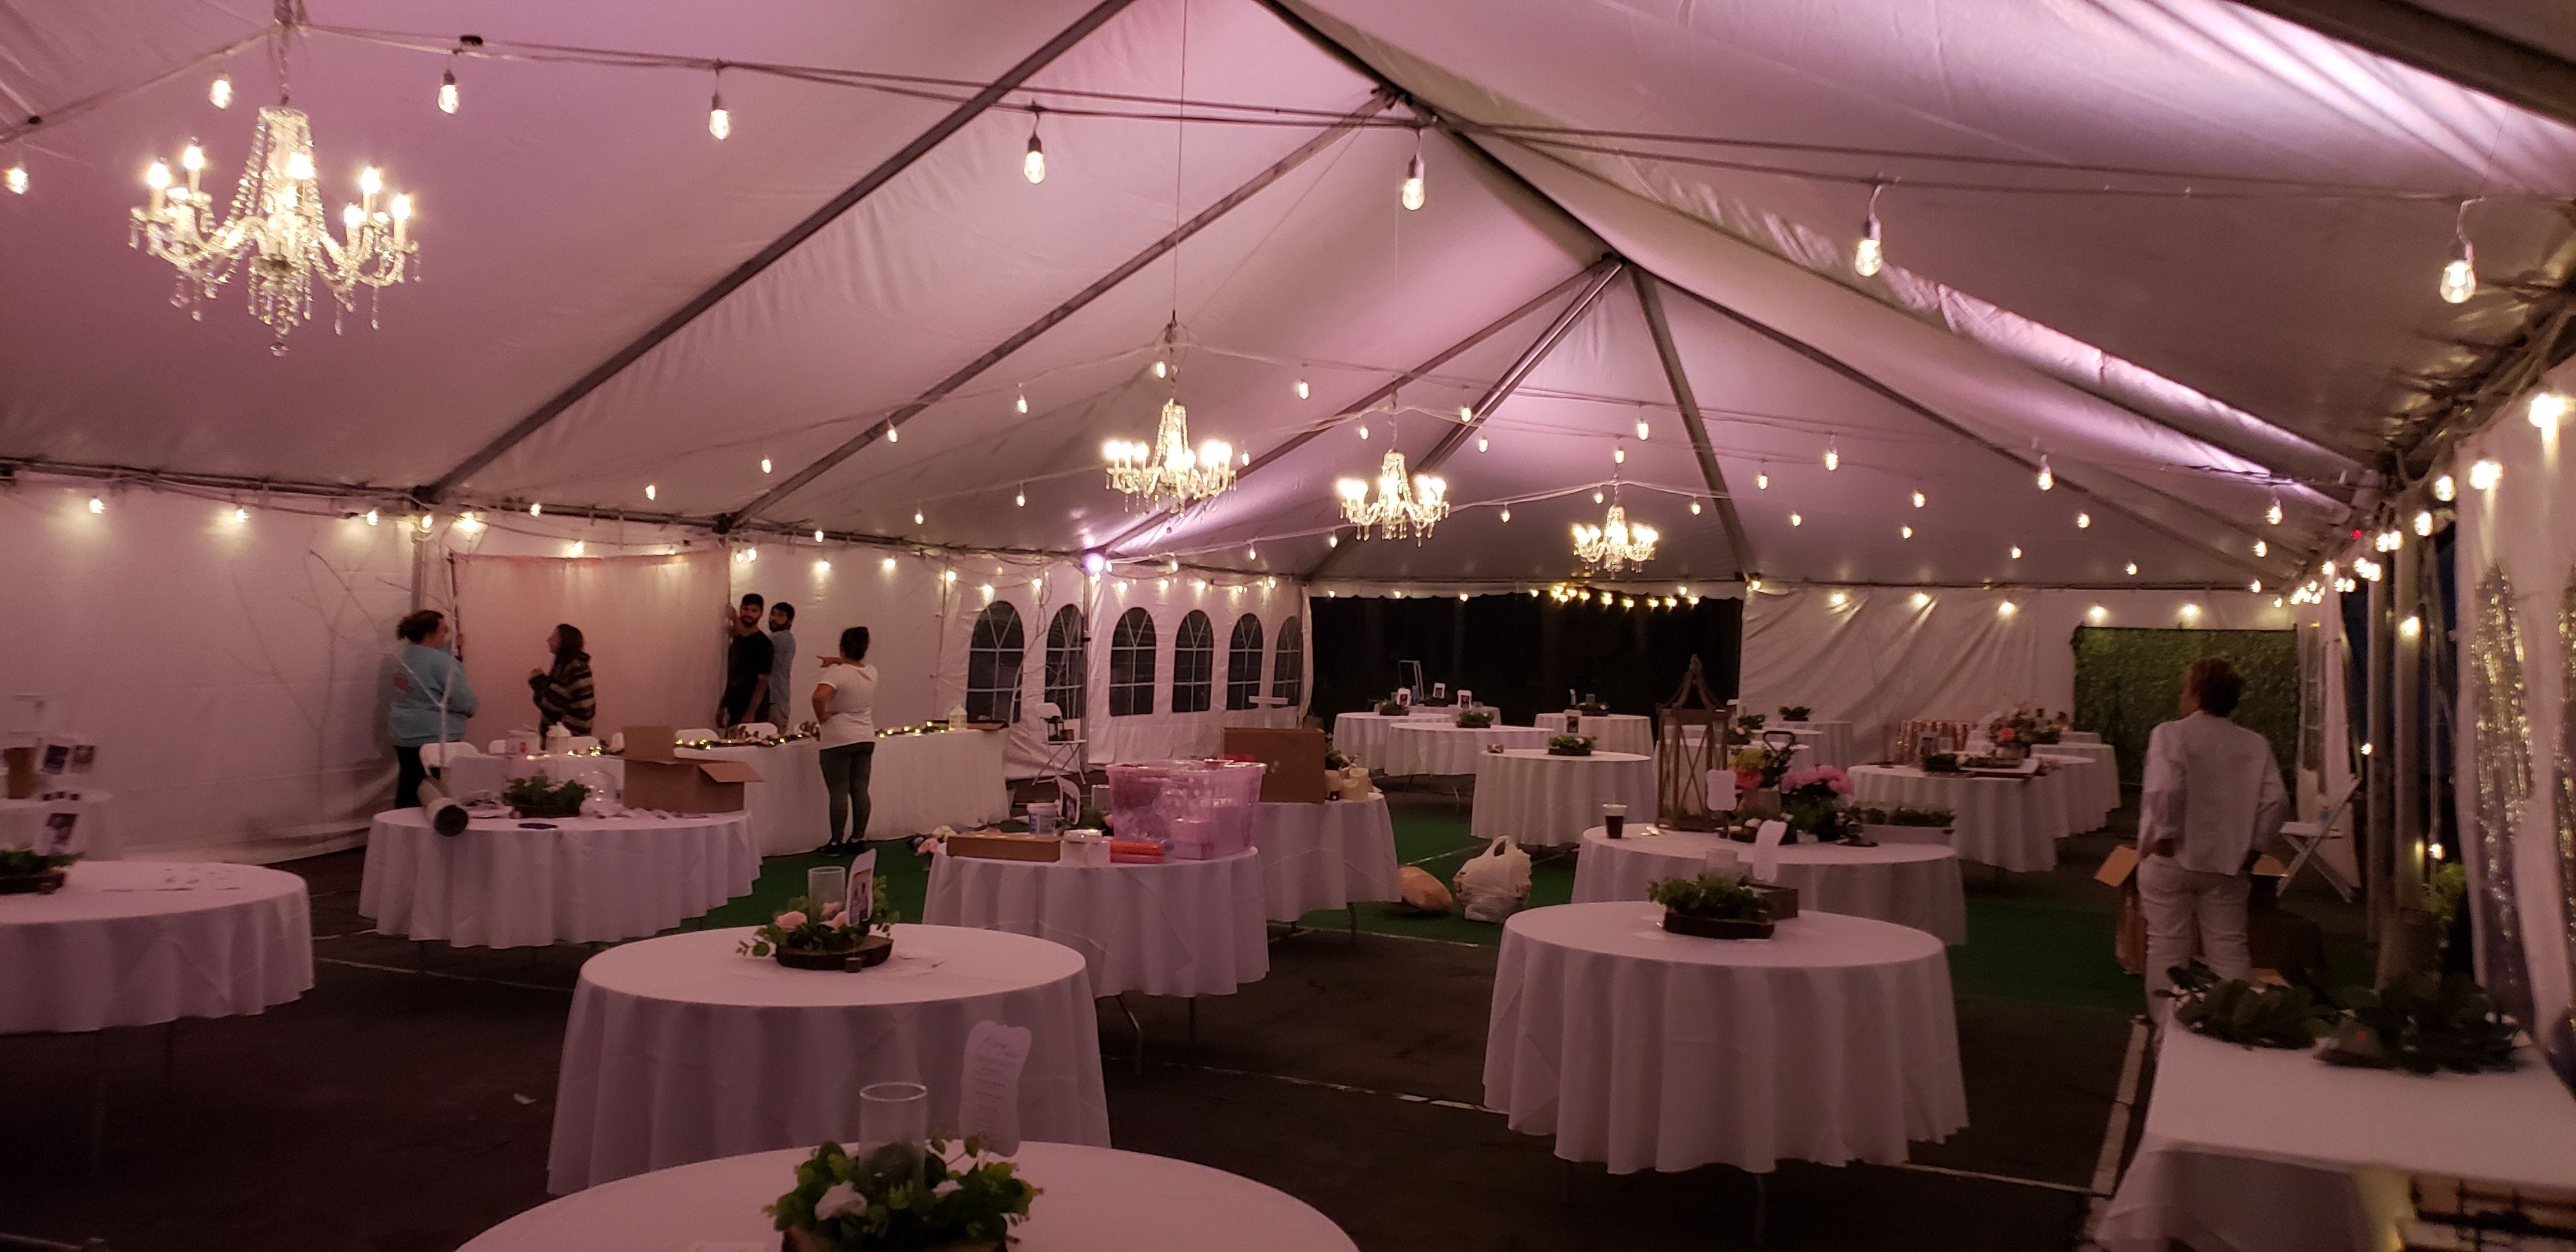 Tent wedding lighting. Up lighting in pink with chandeliers and bistro.